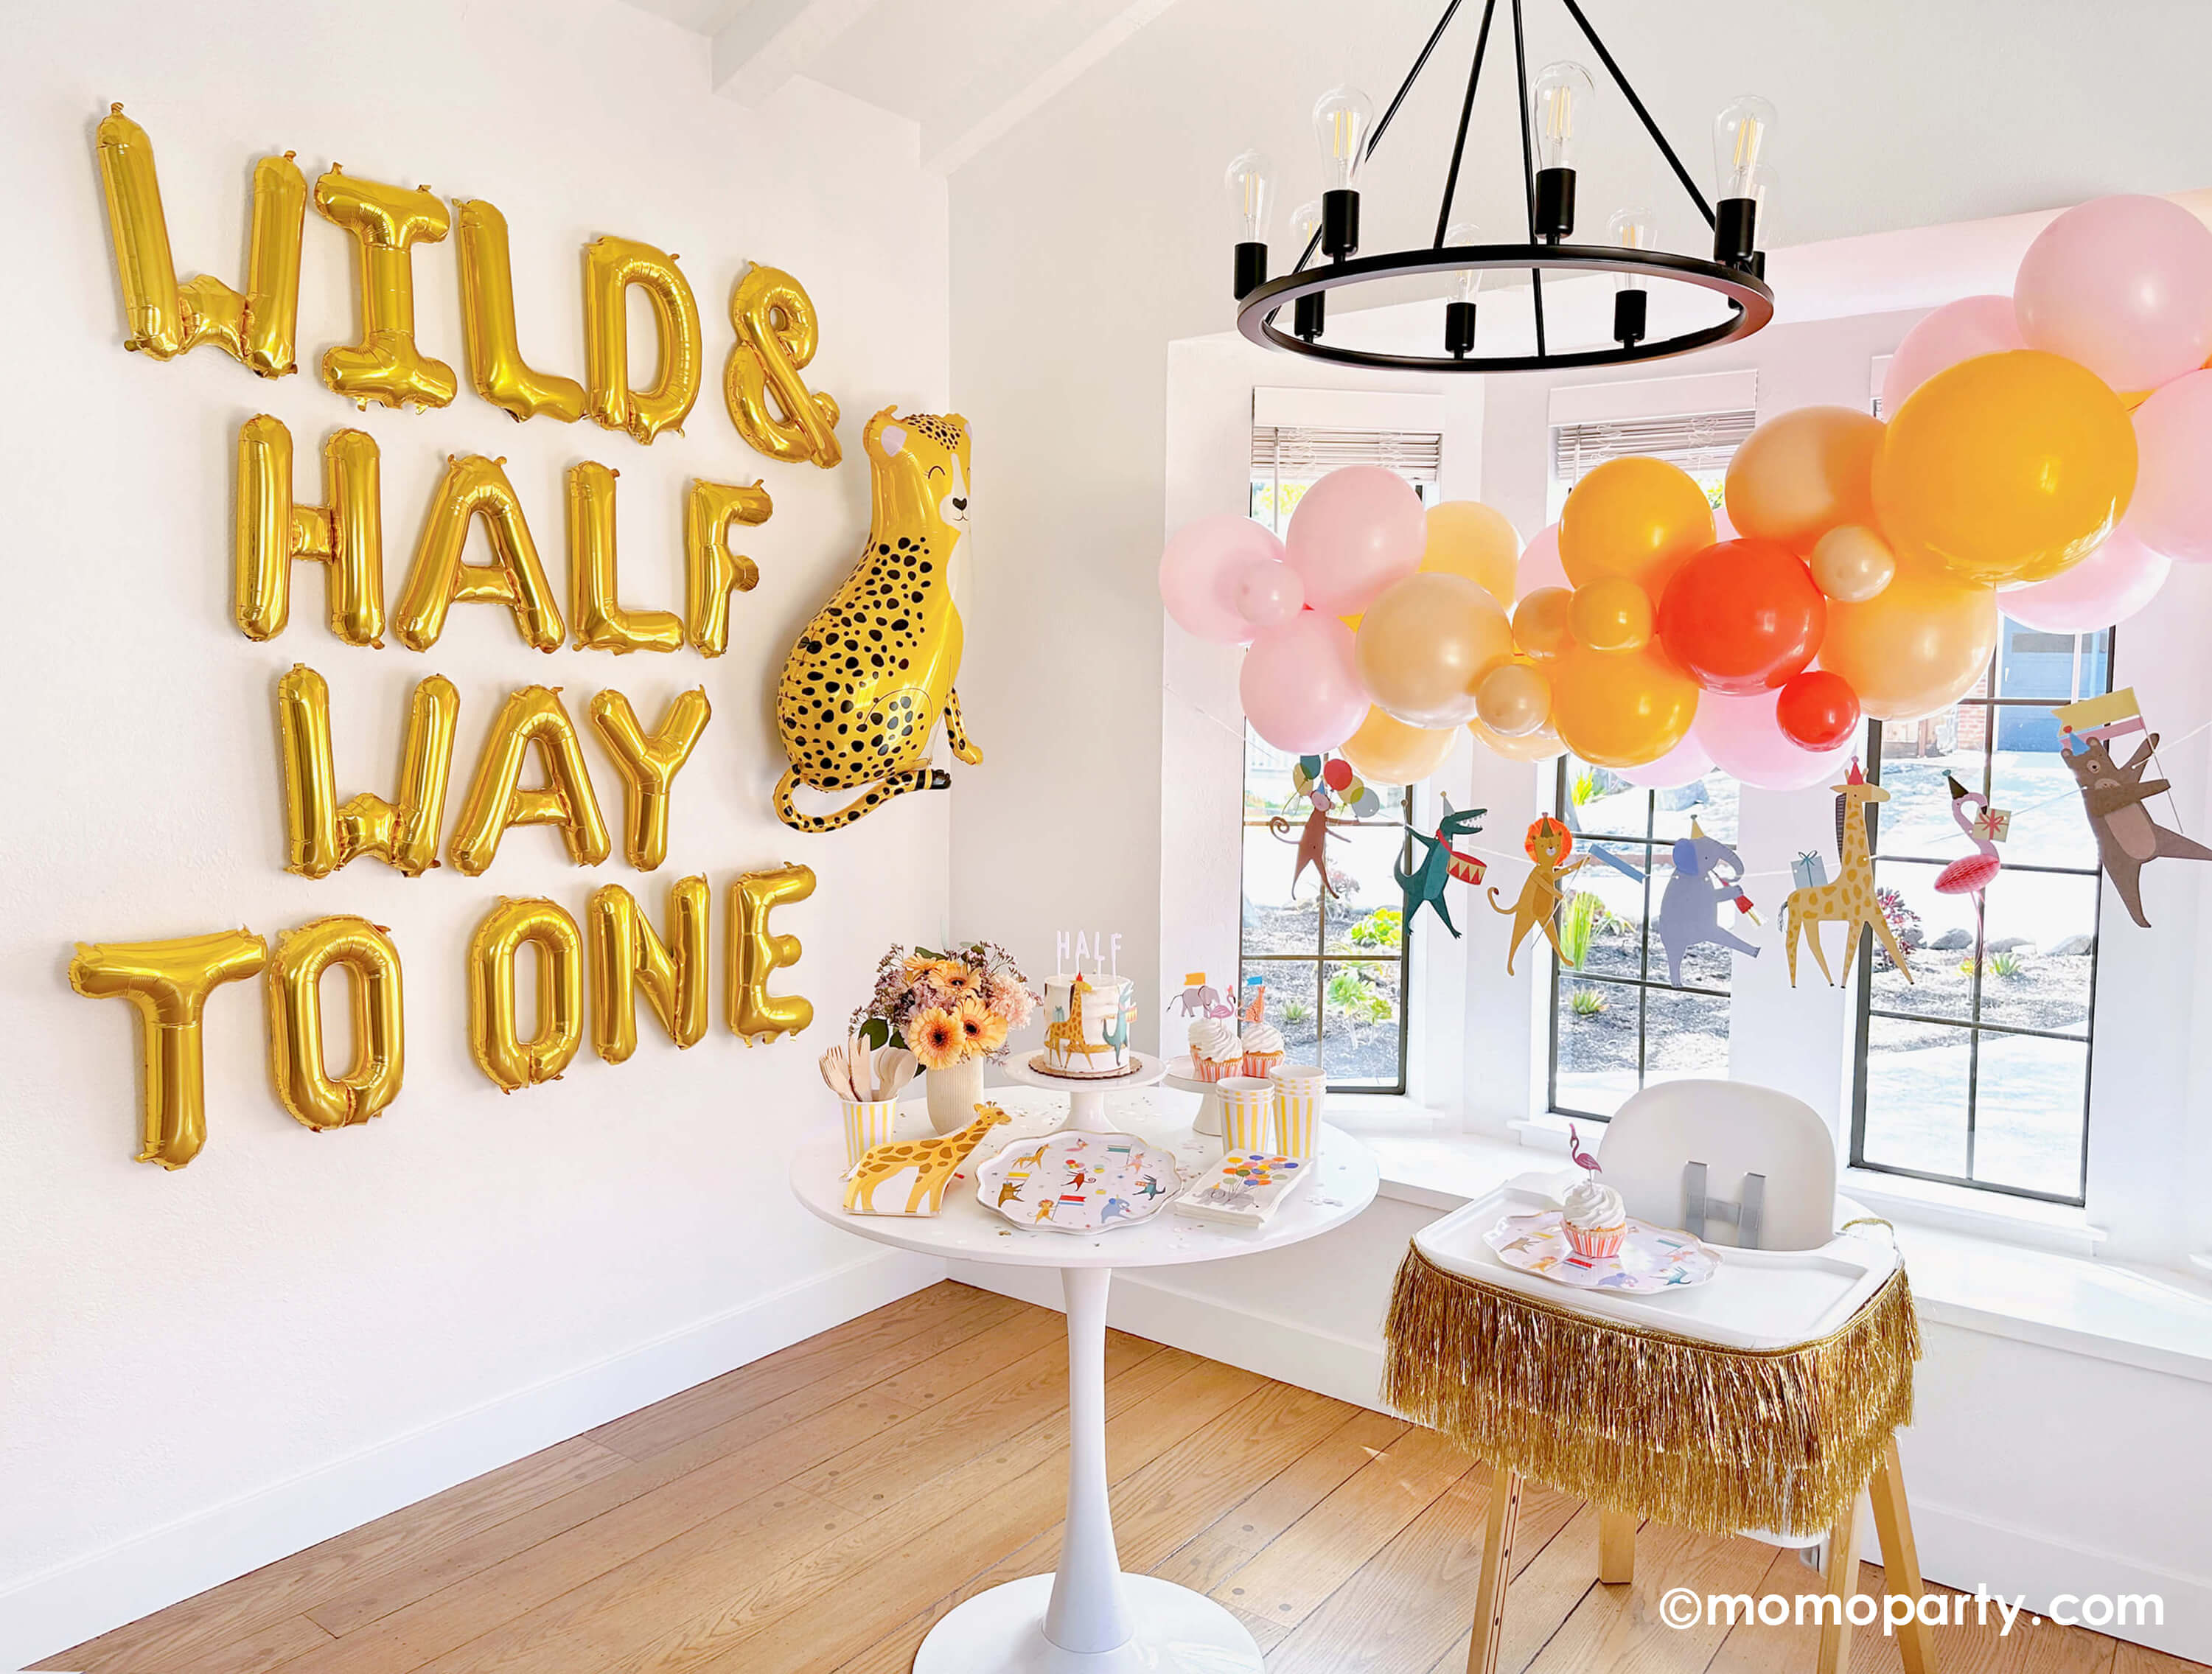 Baby's Half Birthday Party Ideas by Momo Party_6 month baby celebration